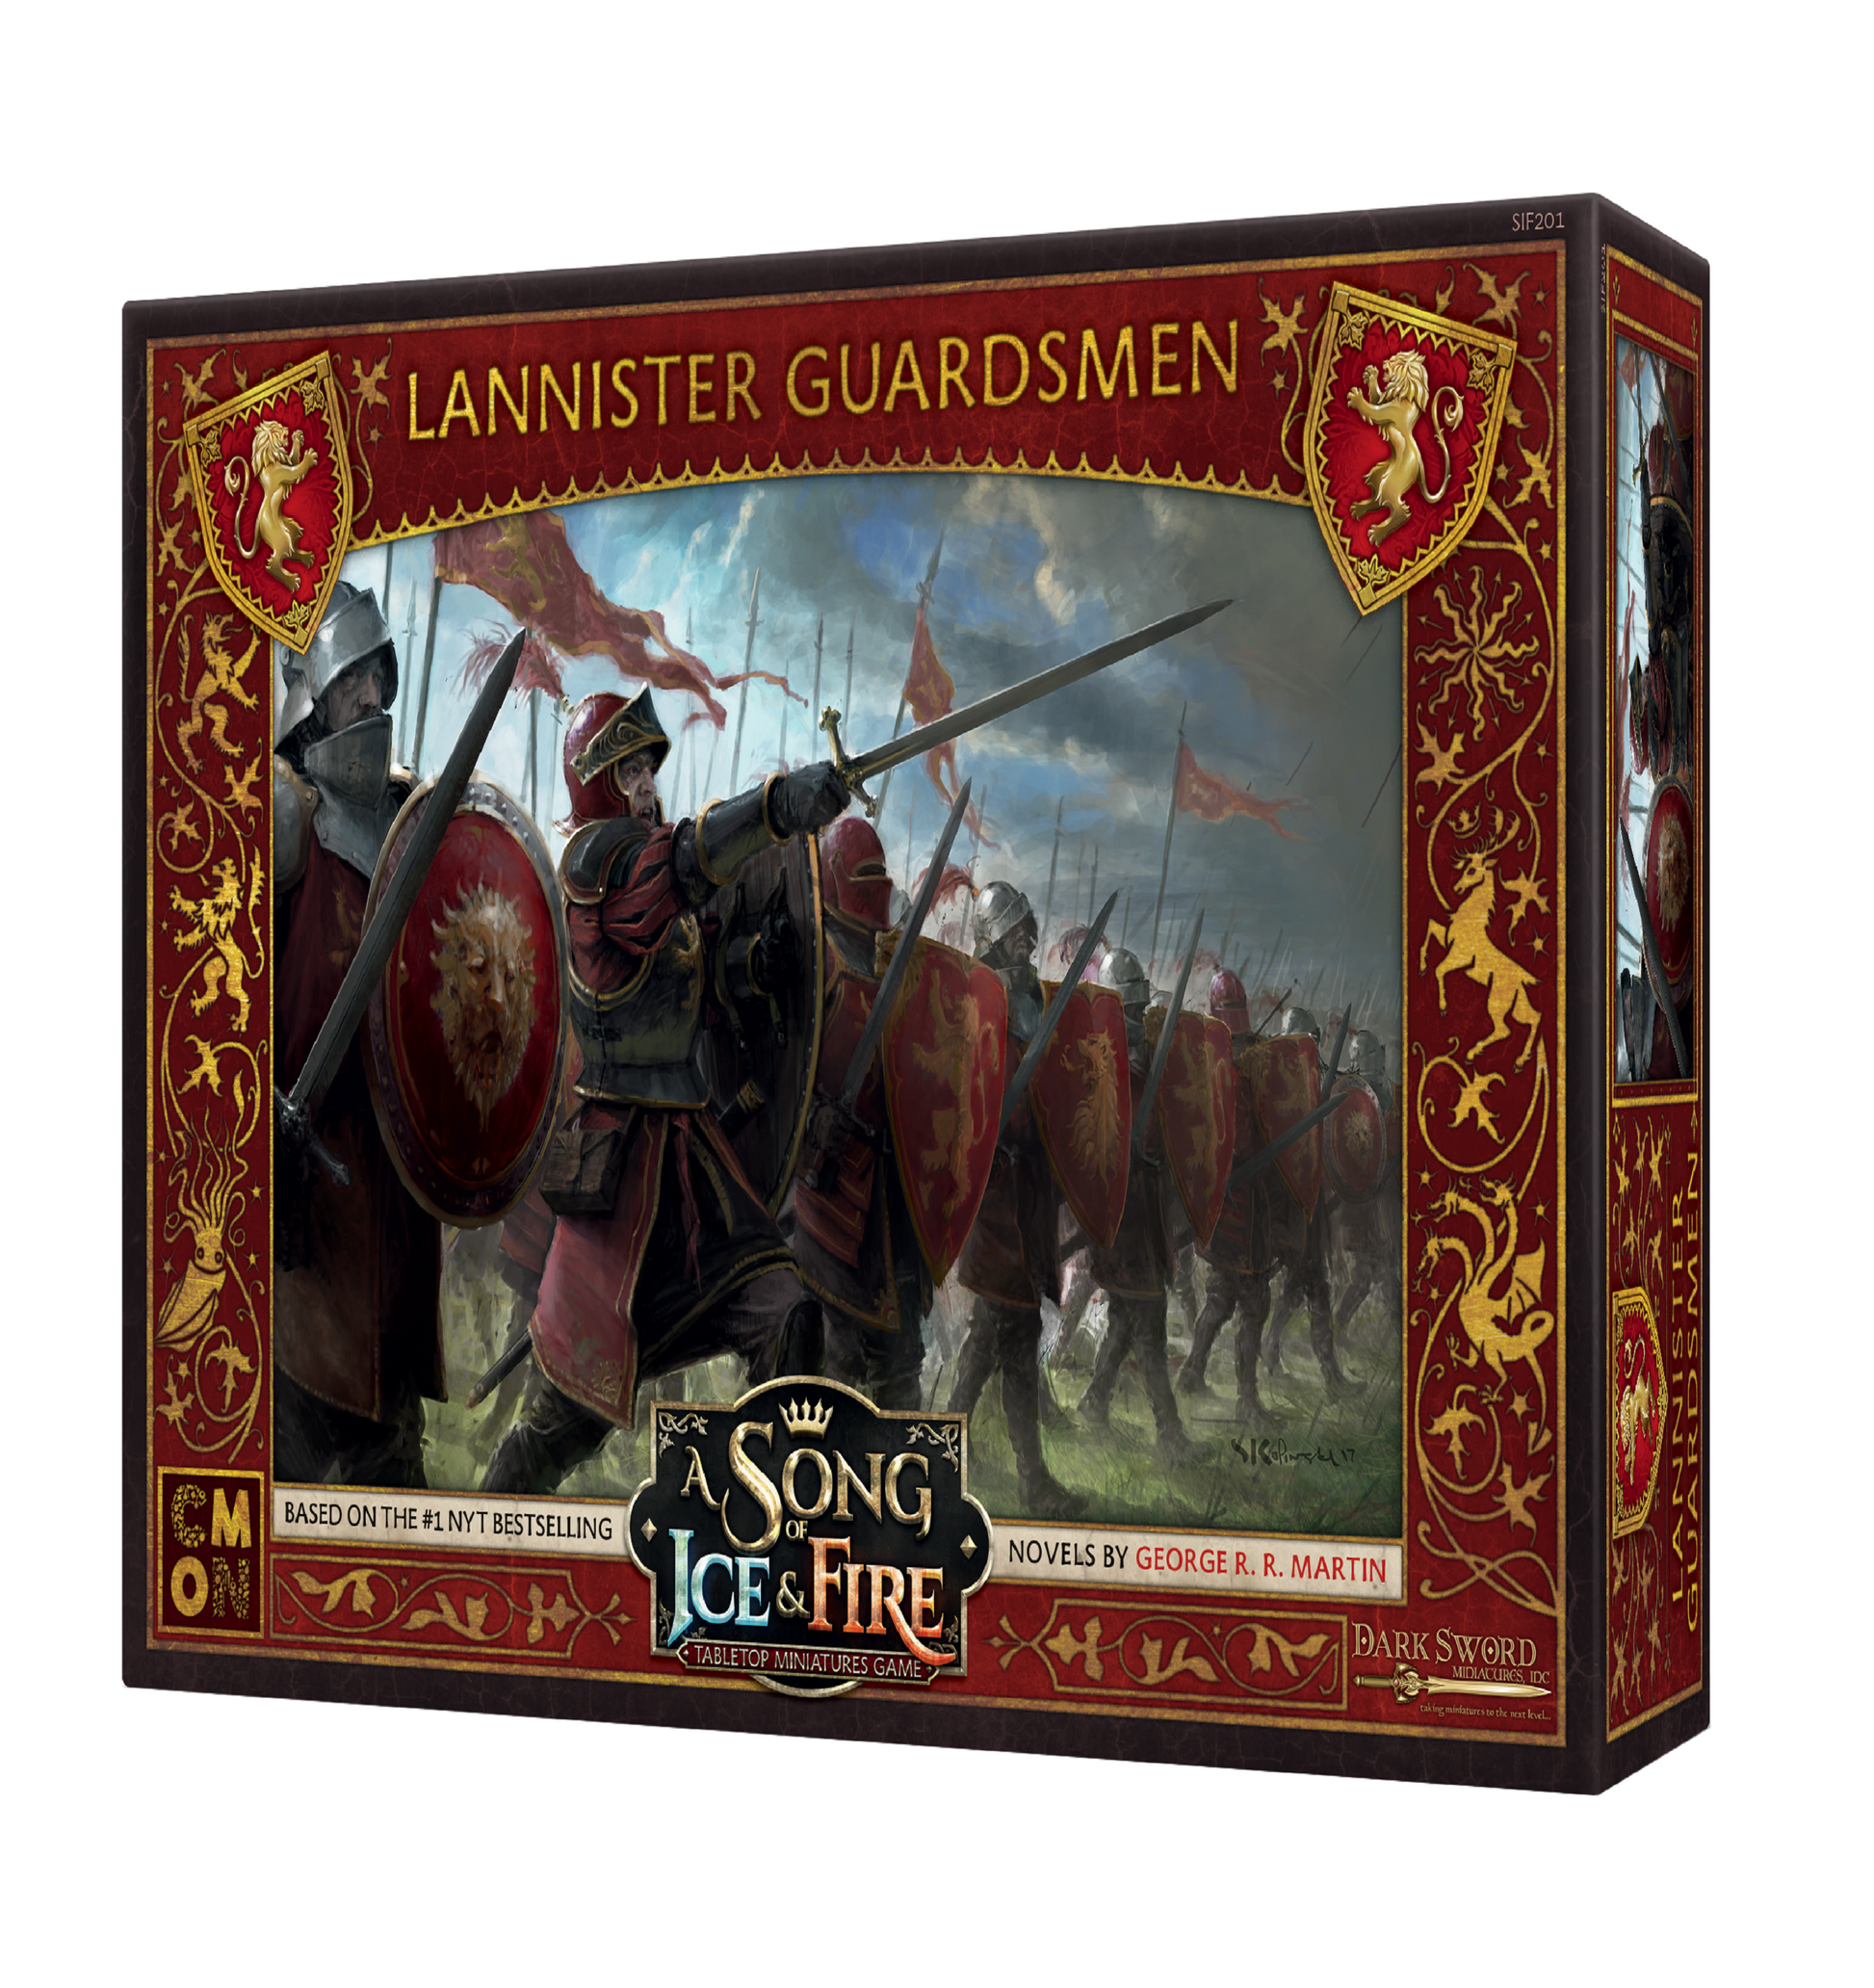 Lannister Guardsmen A Song Of Ice and Fire